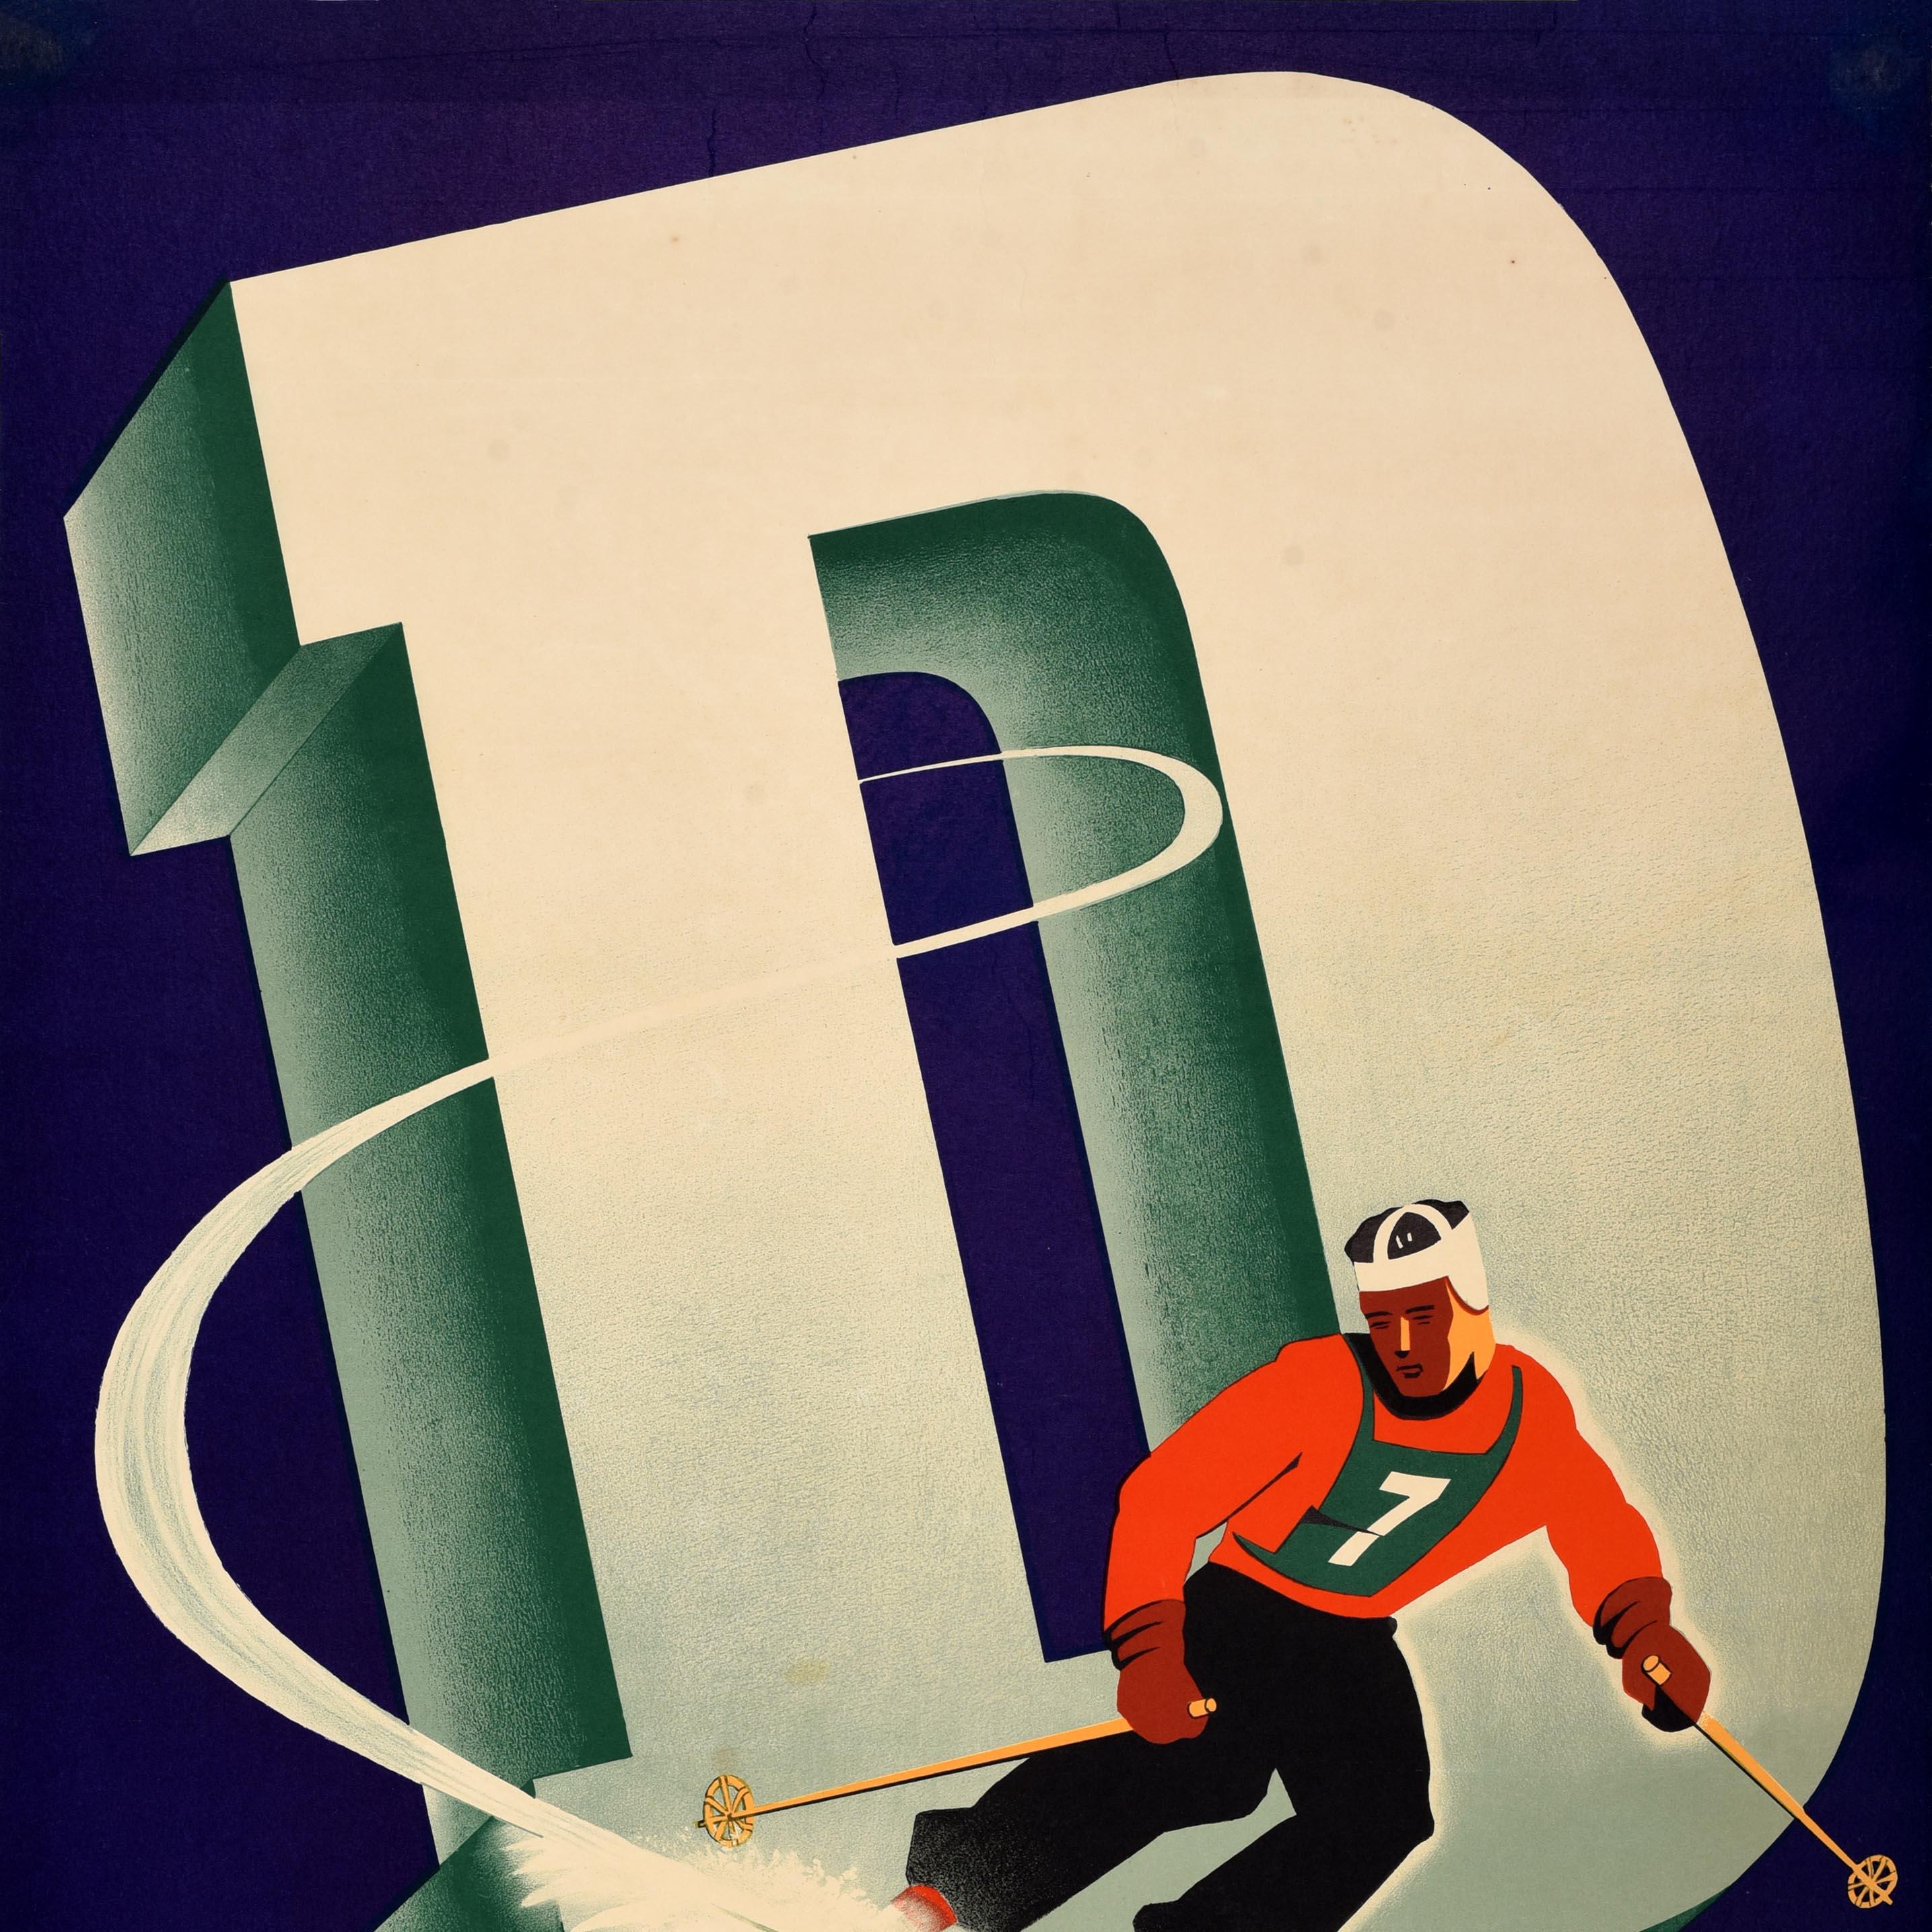 Original vintage skiing poster for the Dartmouth Winter Carnival held on 7-8 February 1941 featuring a dynamic design by Stanley Samuelson Pratt Institute depicting a skier wearing a number 7 bib and helmet skiing at speed through large green shaded